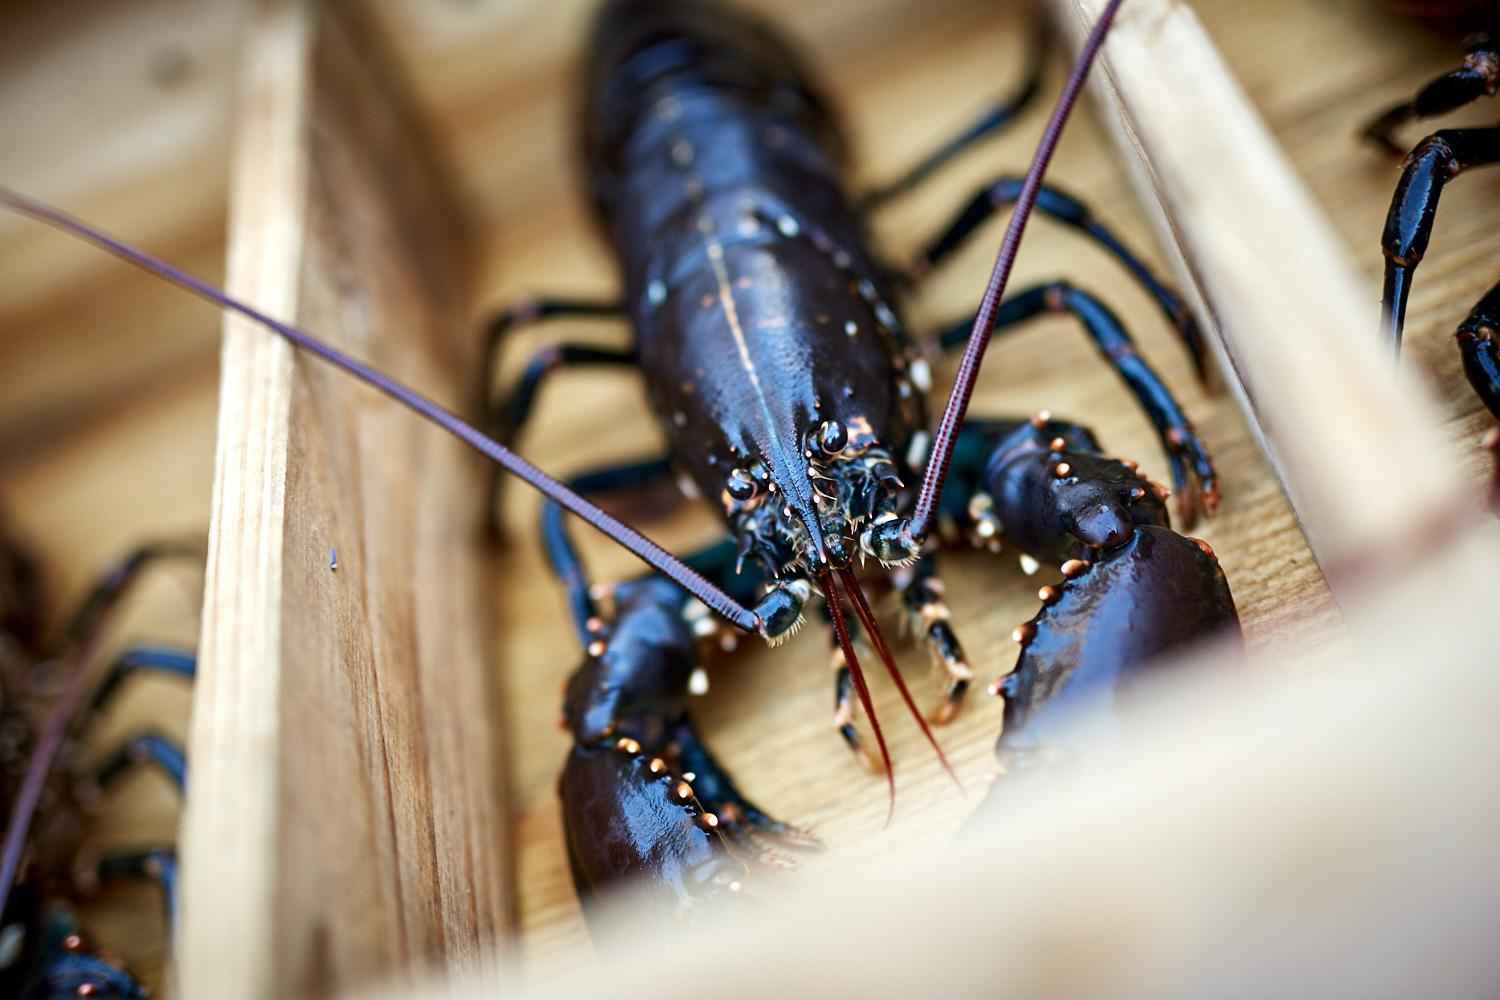 A live lobster on a wooden tray.